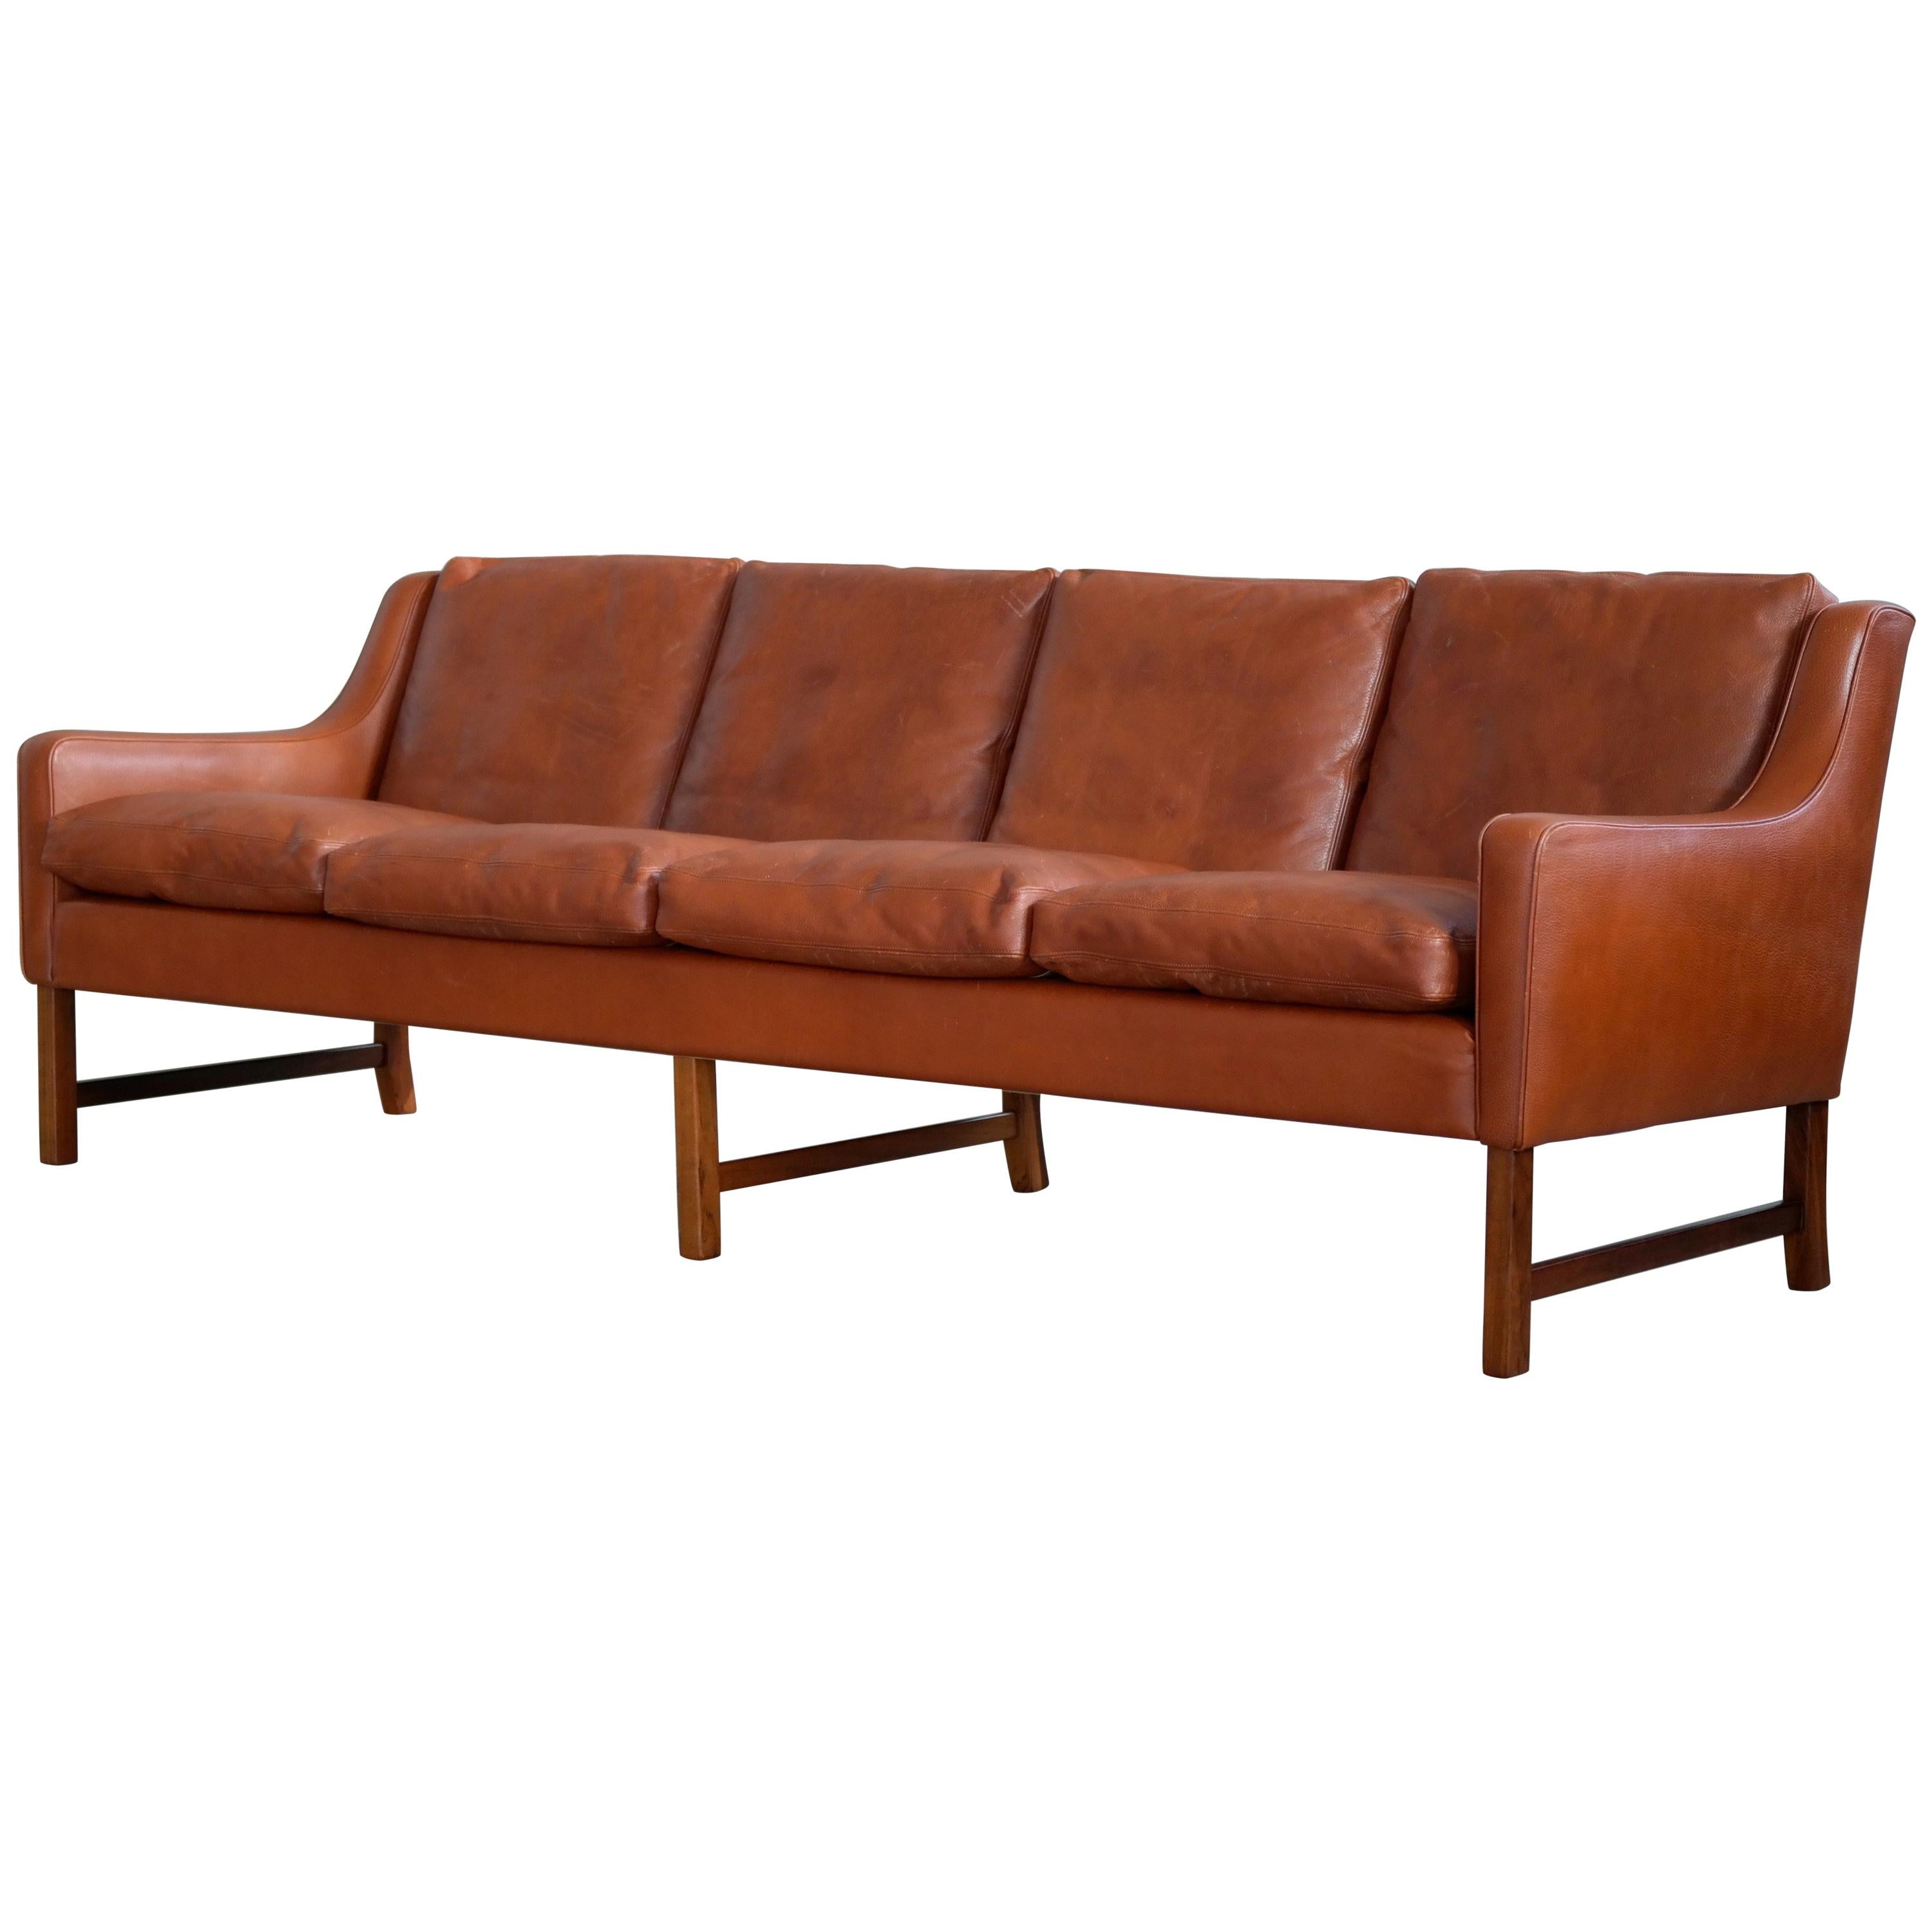 Four-Seat Sofa in Cognac Leather and Rosewood by Fredrik Kayser for Vatne Norway